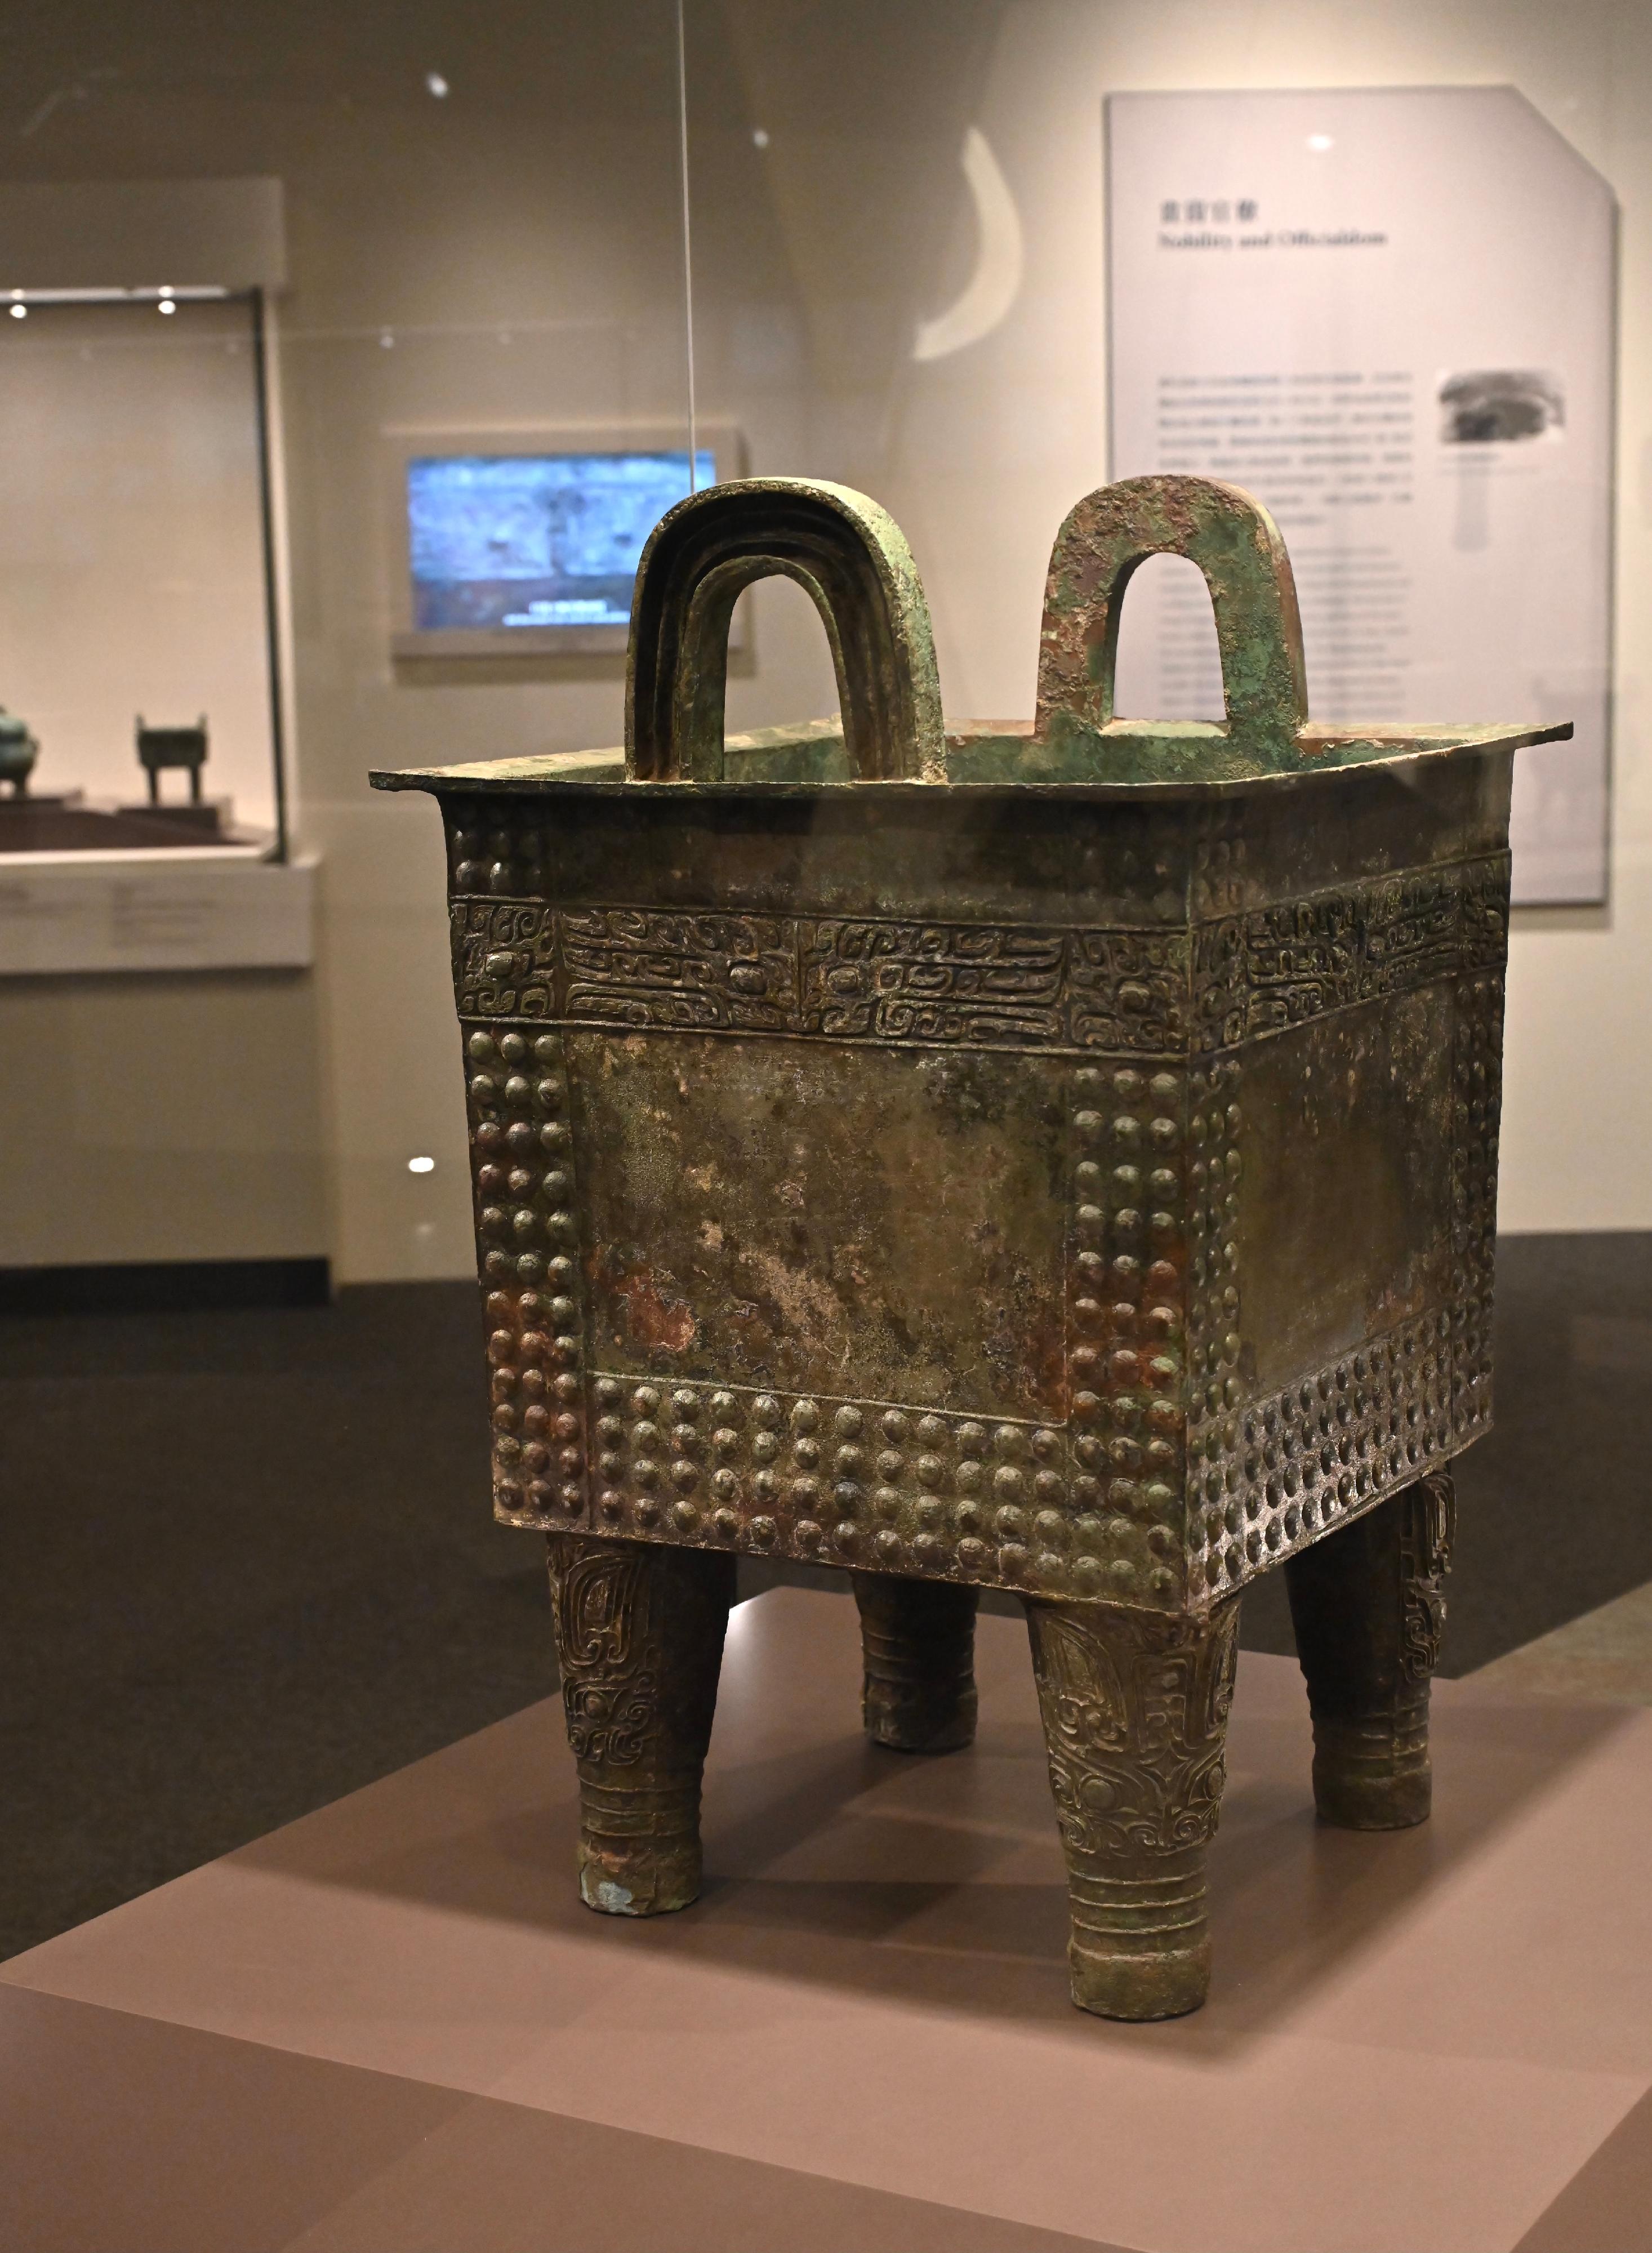 The Hong Kong Museum of History's "The Hong Kong Jockey Club Series: The Ancient Civilisation of the Xia, Shang and Zhou Dynasties in Henan Province" exhibition will be open to public from tomorrow (April 3). Photo shows a bronze square ding (food vessel) with animal mask and nipple patterns from the early Shang dynasty from a collection of the Henan Museum, unearthed from the Nanshuncheng Street Bronze Hoard in Zhengzhou.